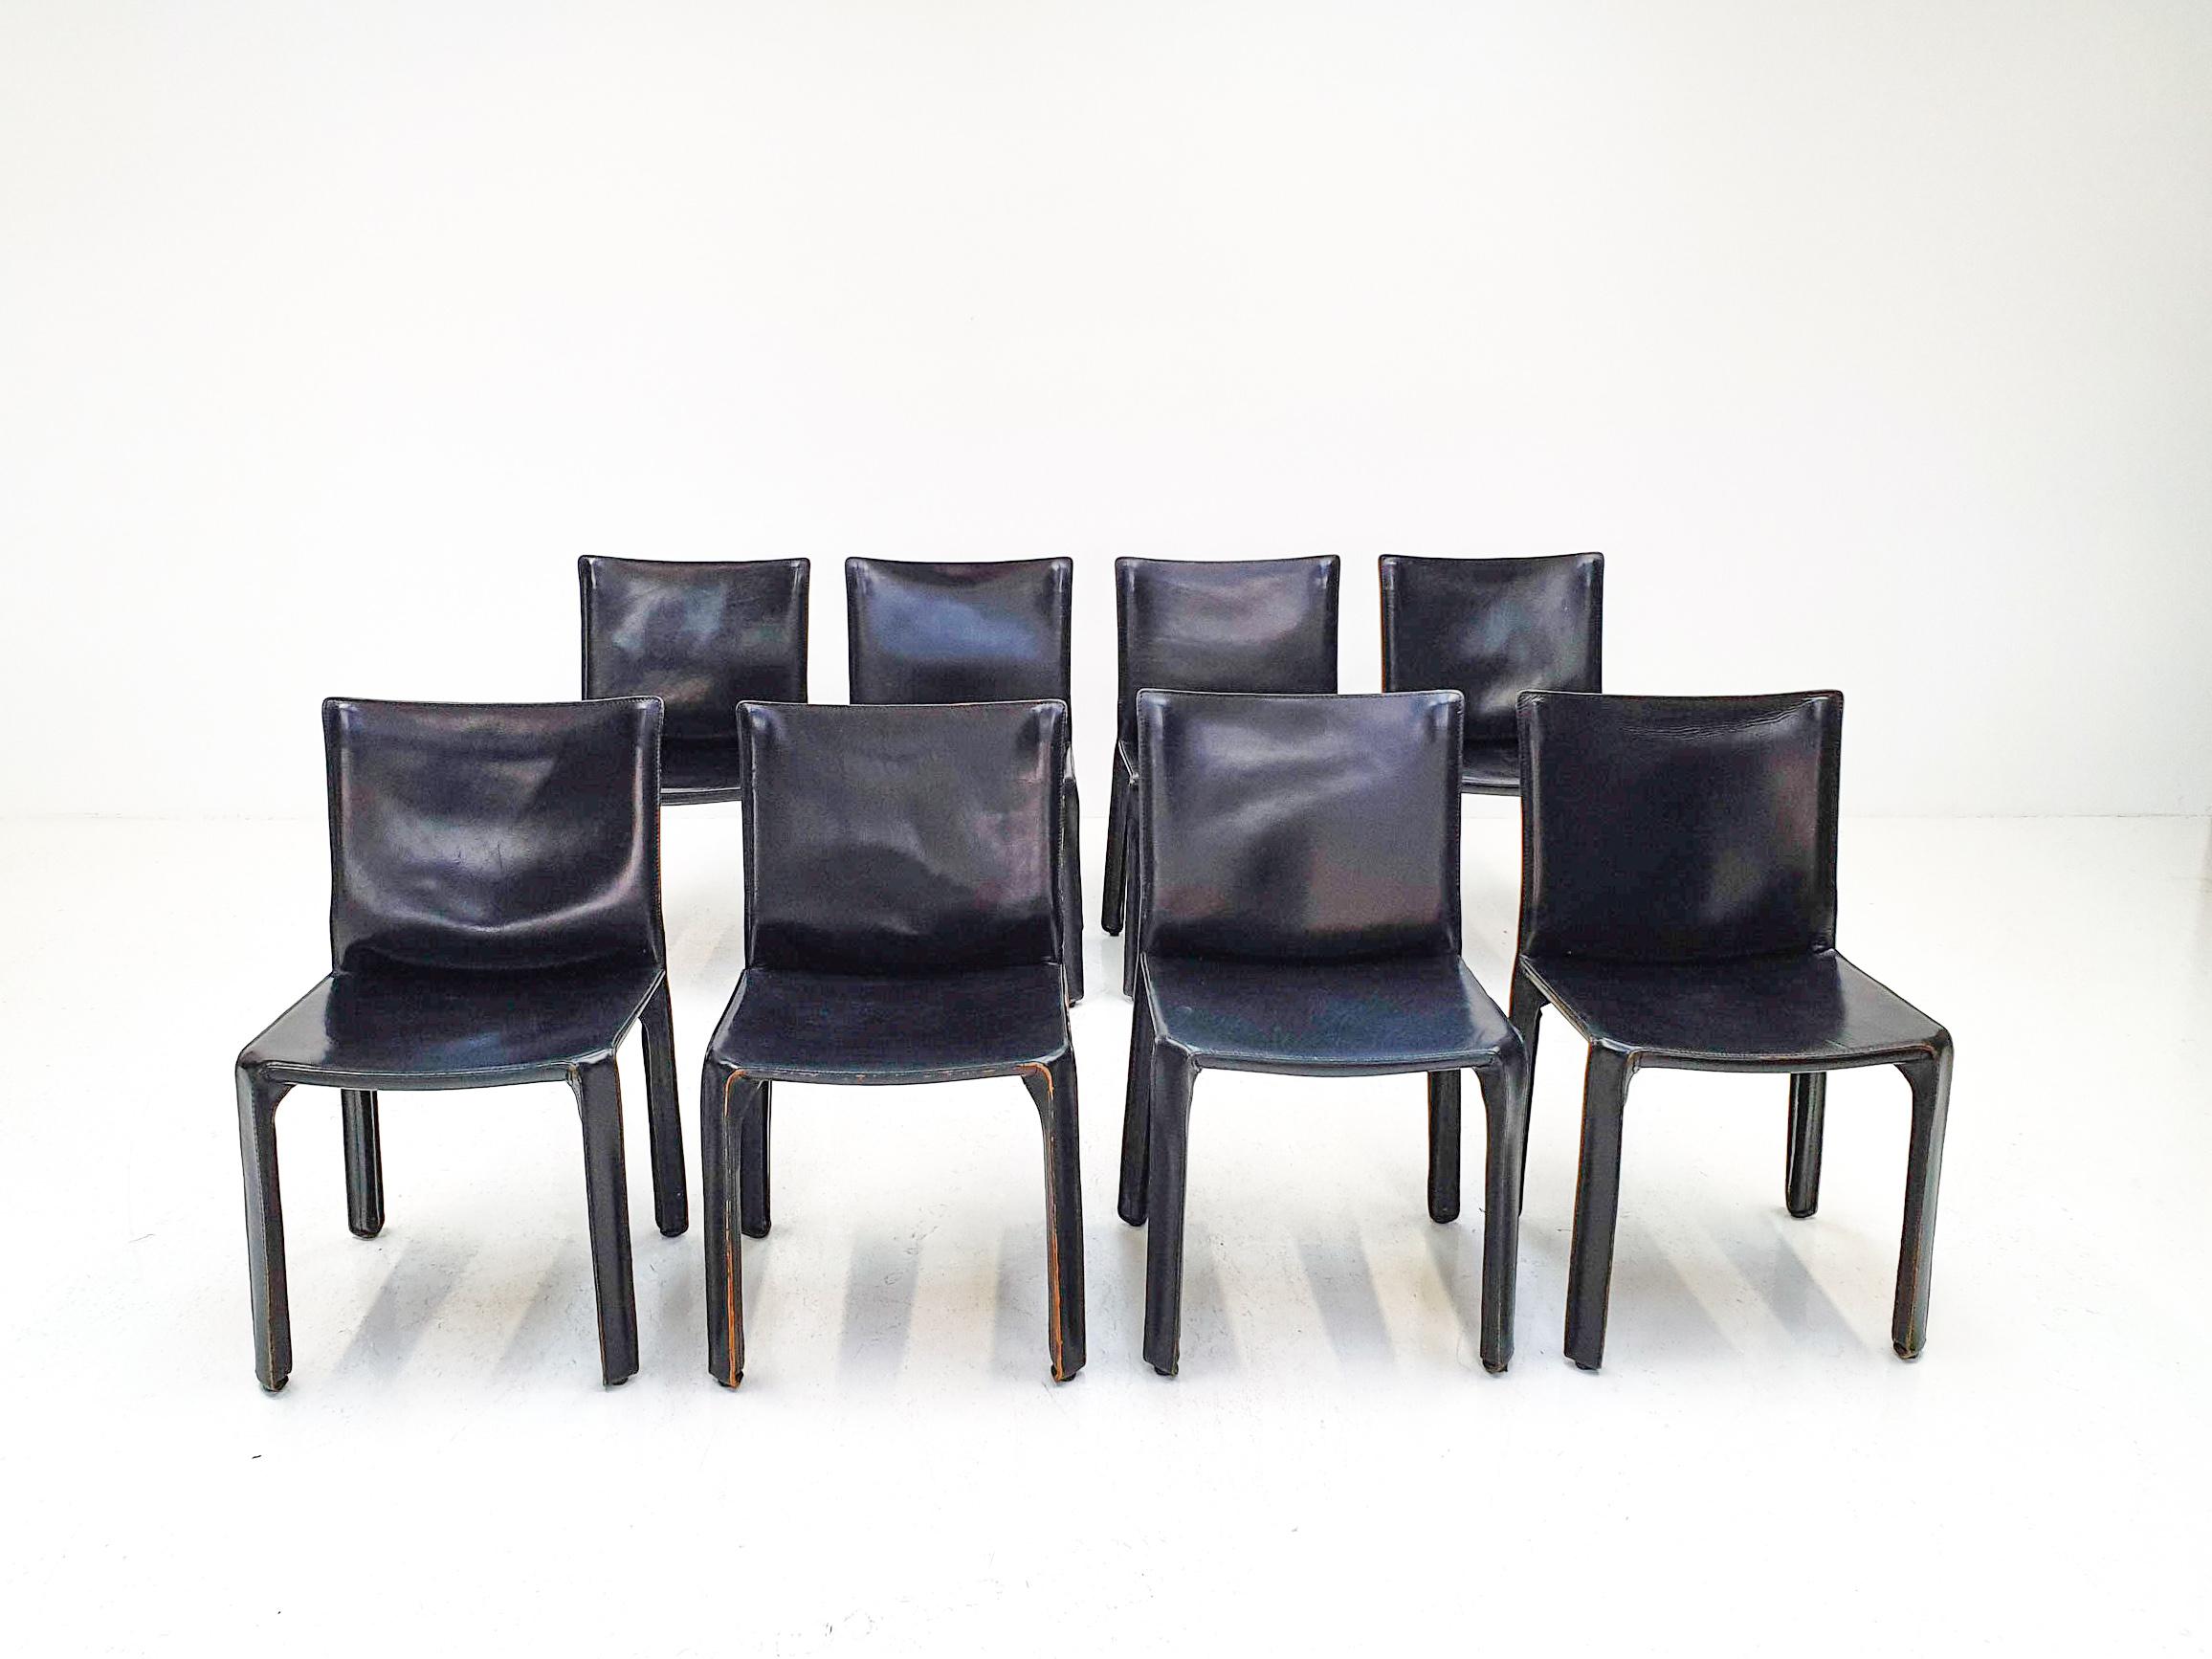 Italian Set of 8 Mario Bellini Leather CAB Chairs in Black for Cassina, 1977, Italy